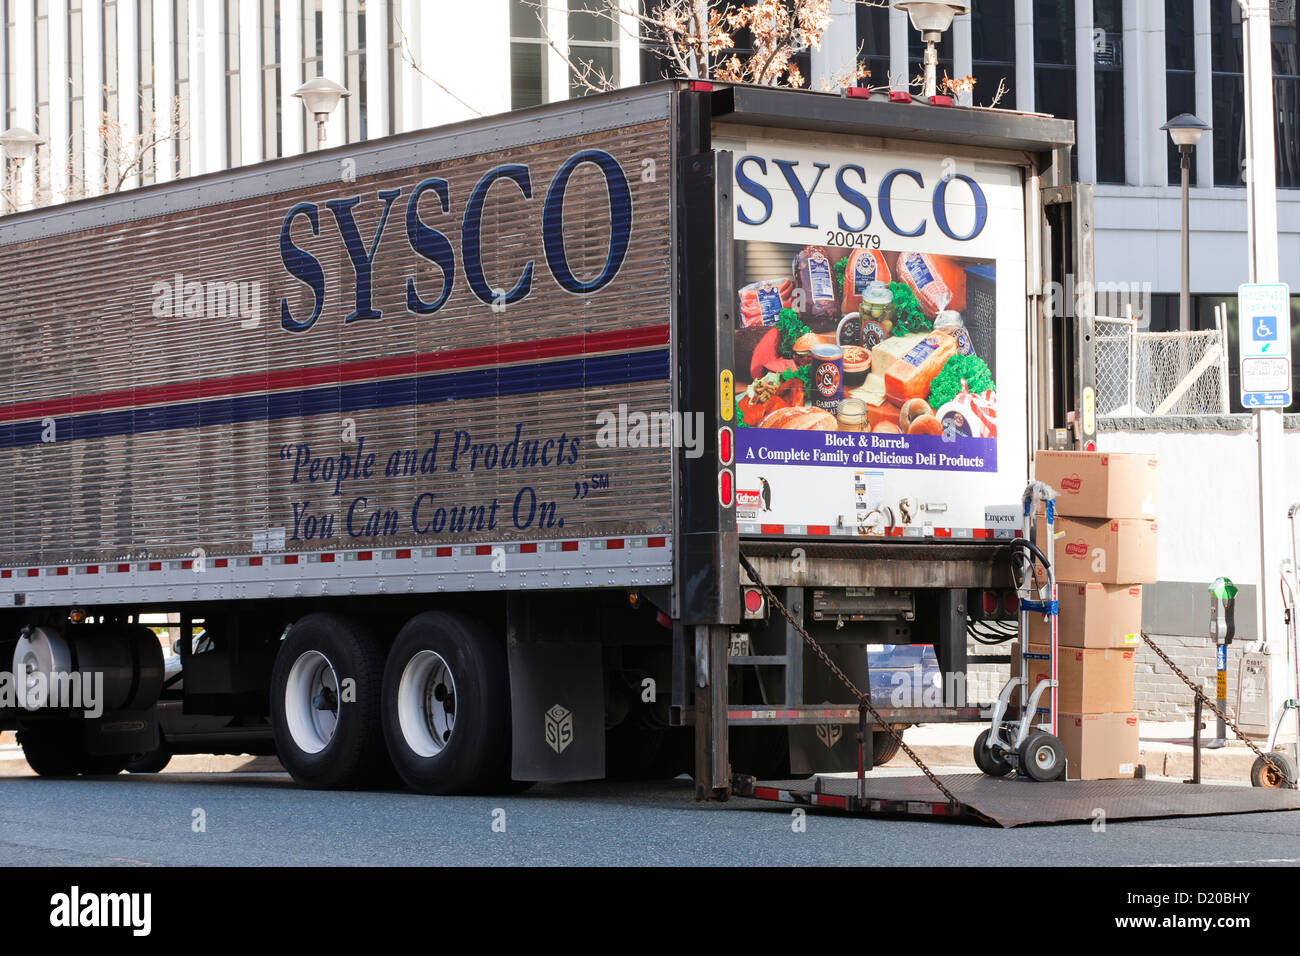 Sysco food delivery truck - Washington, DC USA Banque D'Images